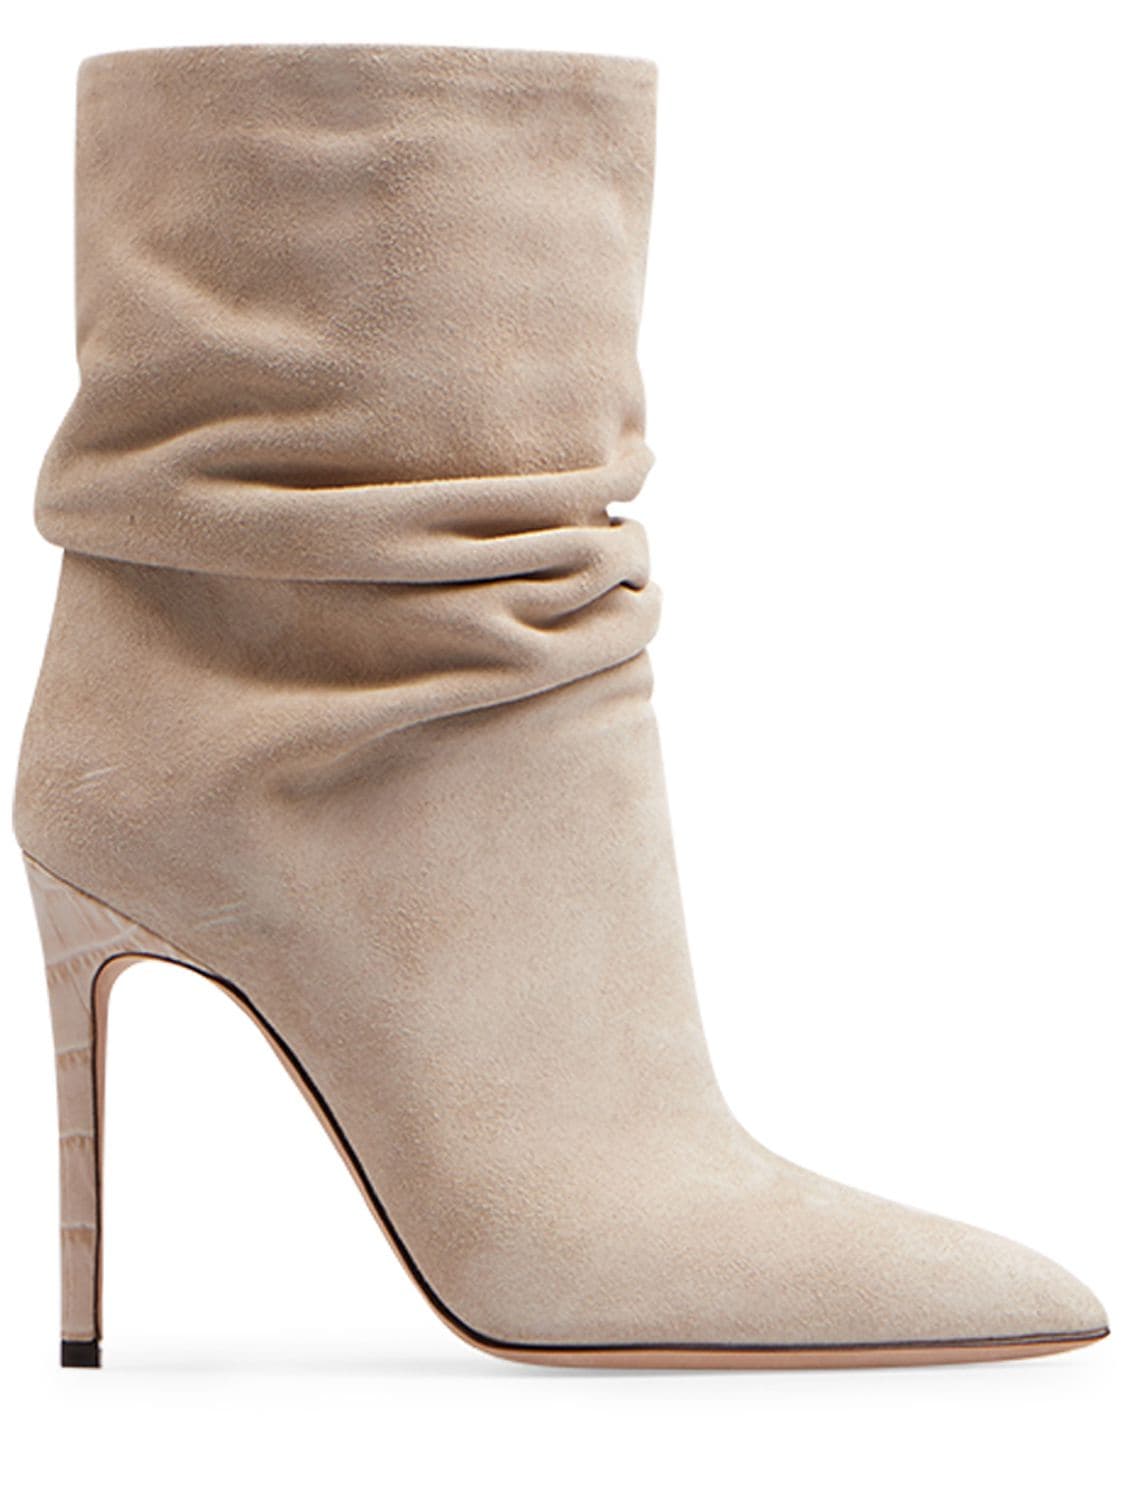 Paris Texas 105mm Slouchy Suede Ankle Boots In Taupe